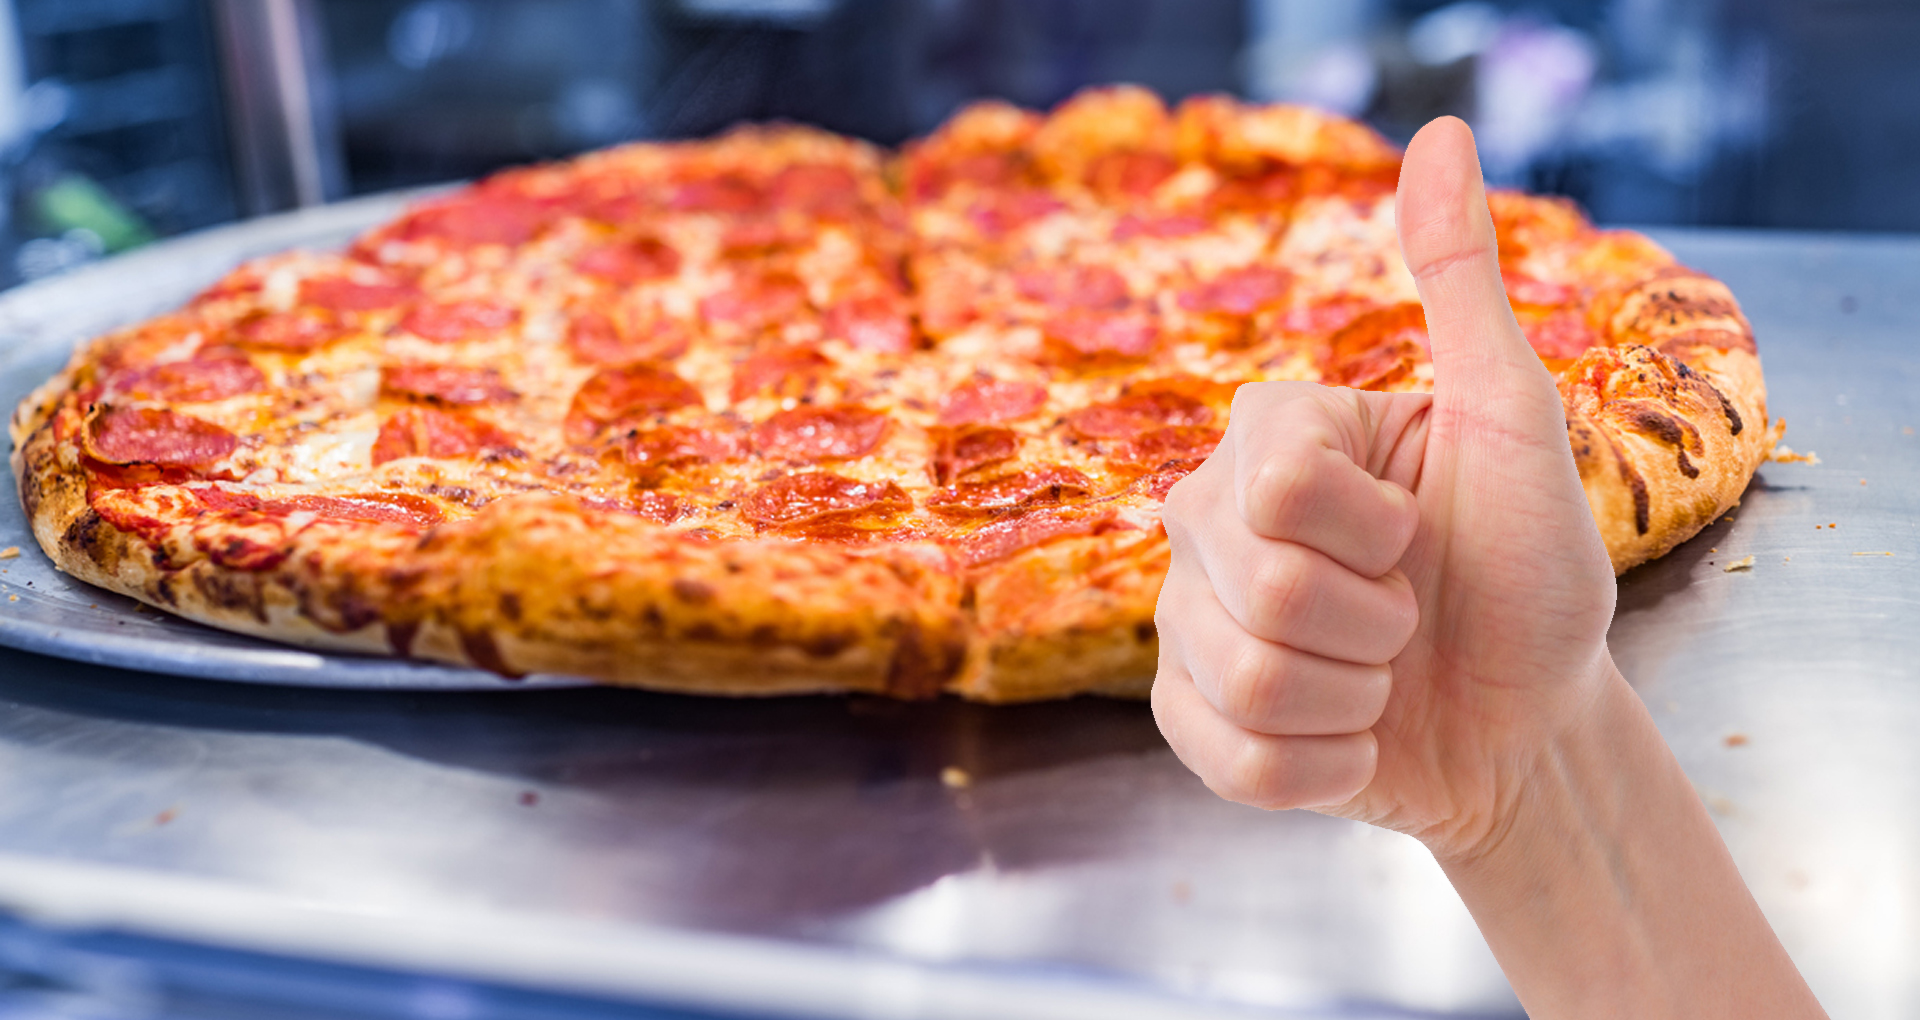 Thumbs up for pizza!